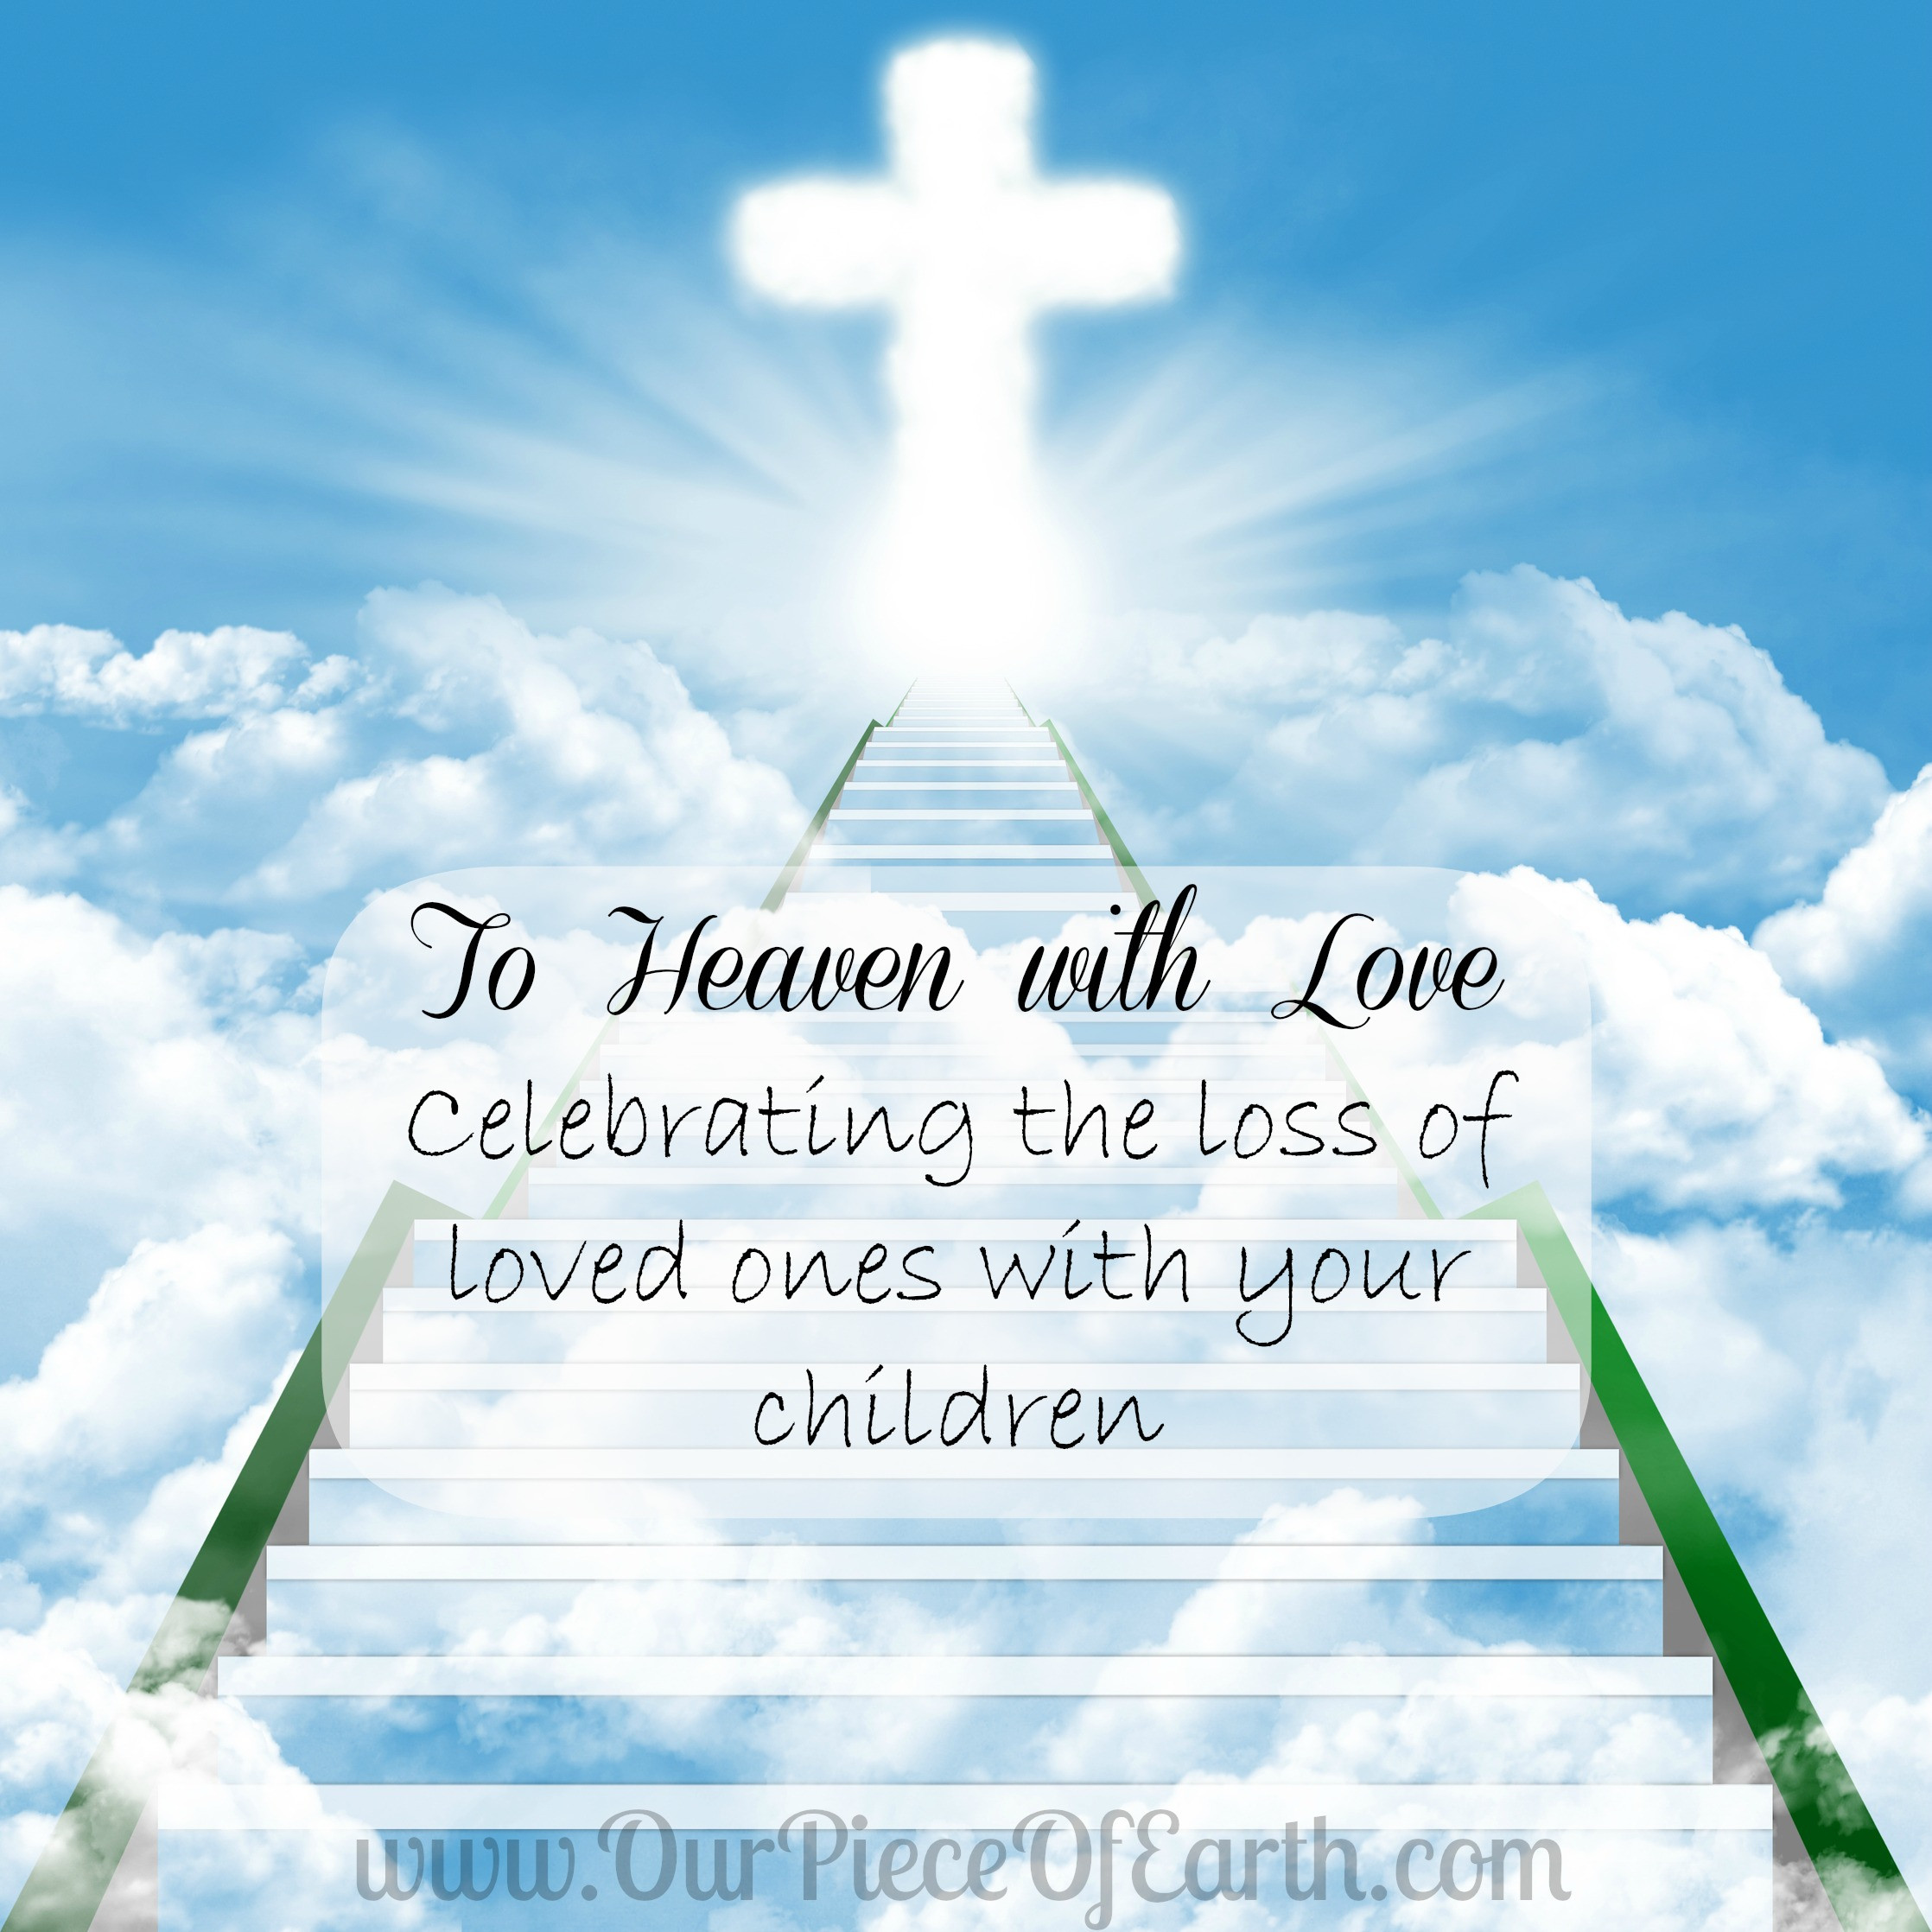 Quotes For Love Ones
 Loved es In Heaven Quotes QuotesGram